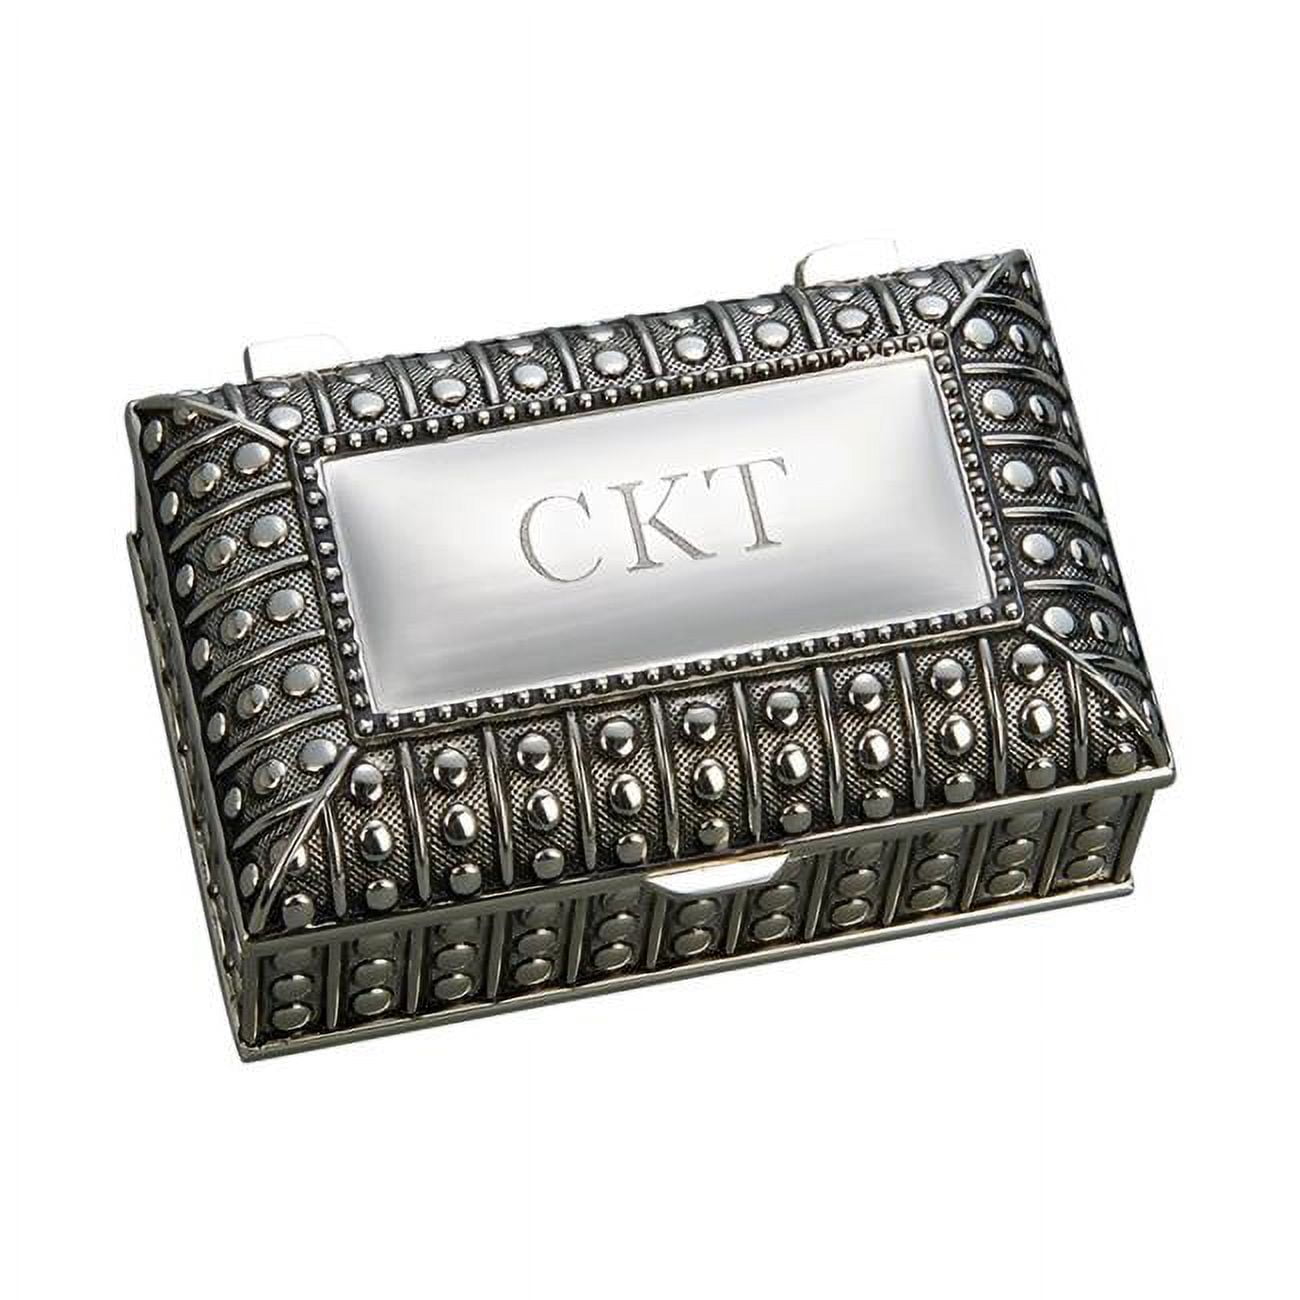 026026 2.25 X 3.5 In. Beaded Antique Rectangle Box - Silver Plated